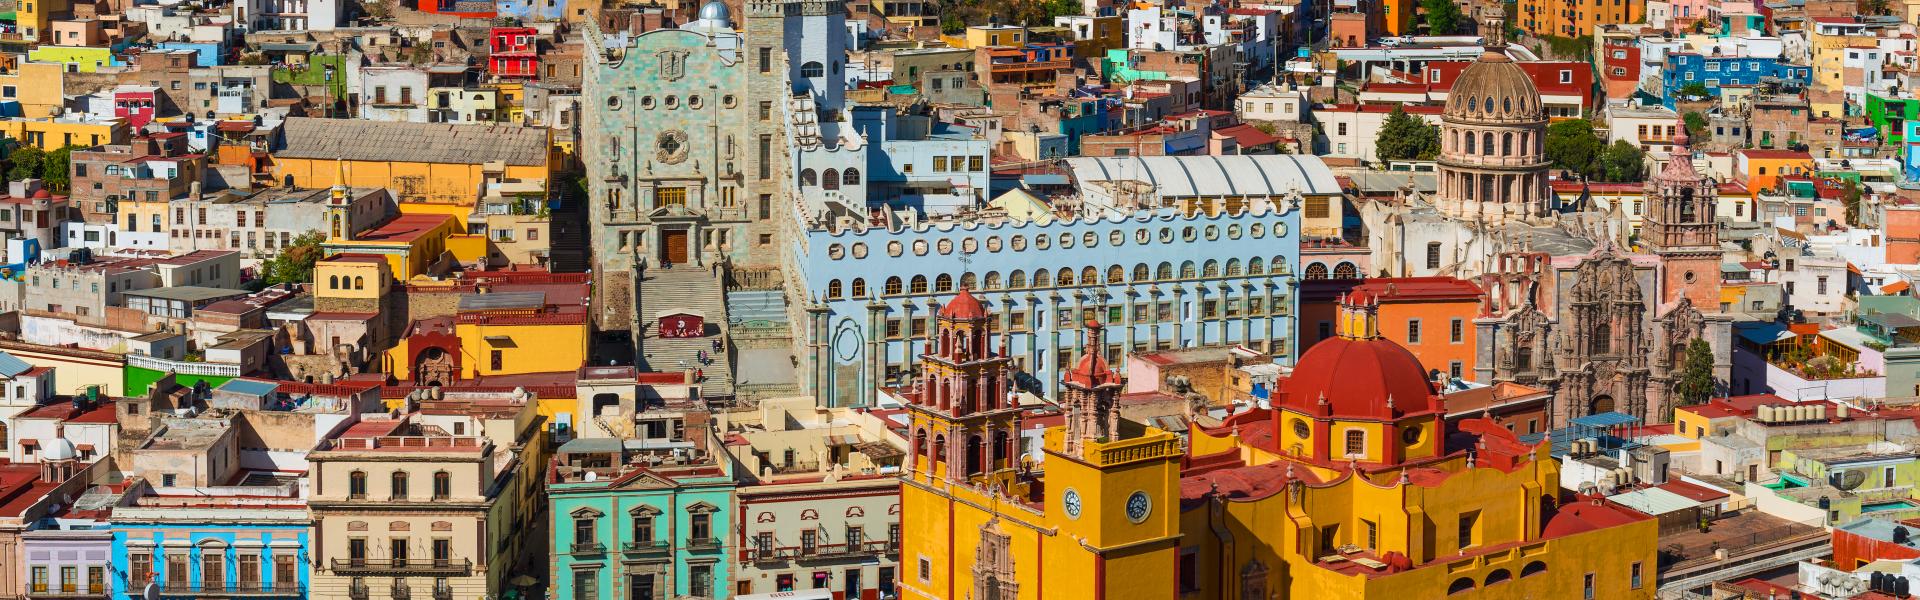 Holiday lettings & accommodation in Mexico City - HomeToGo